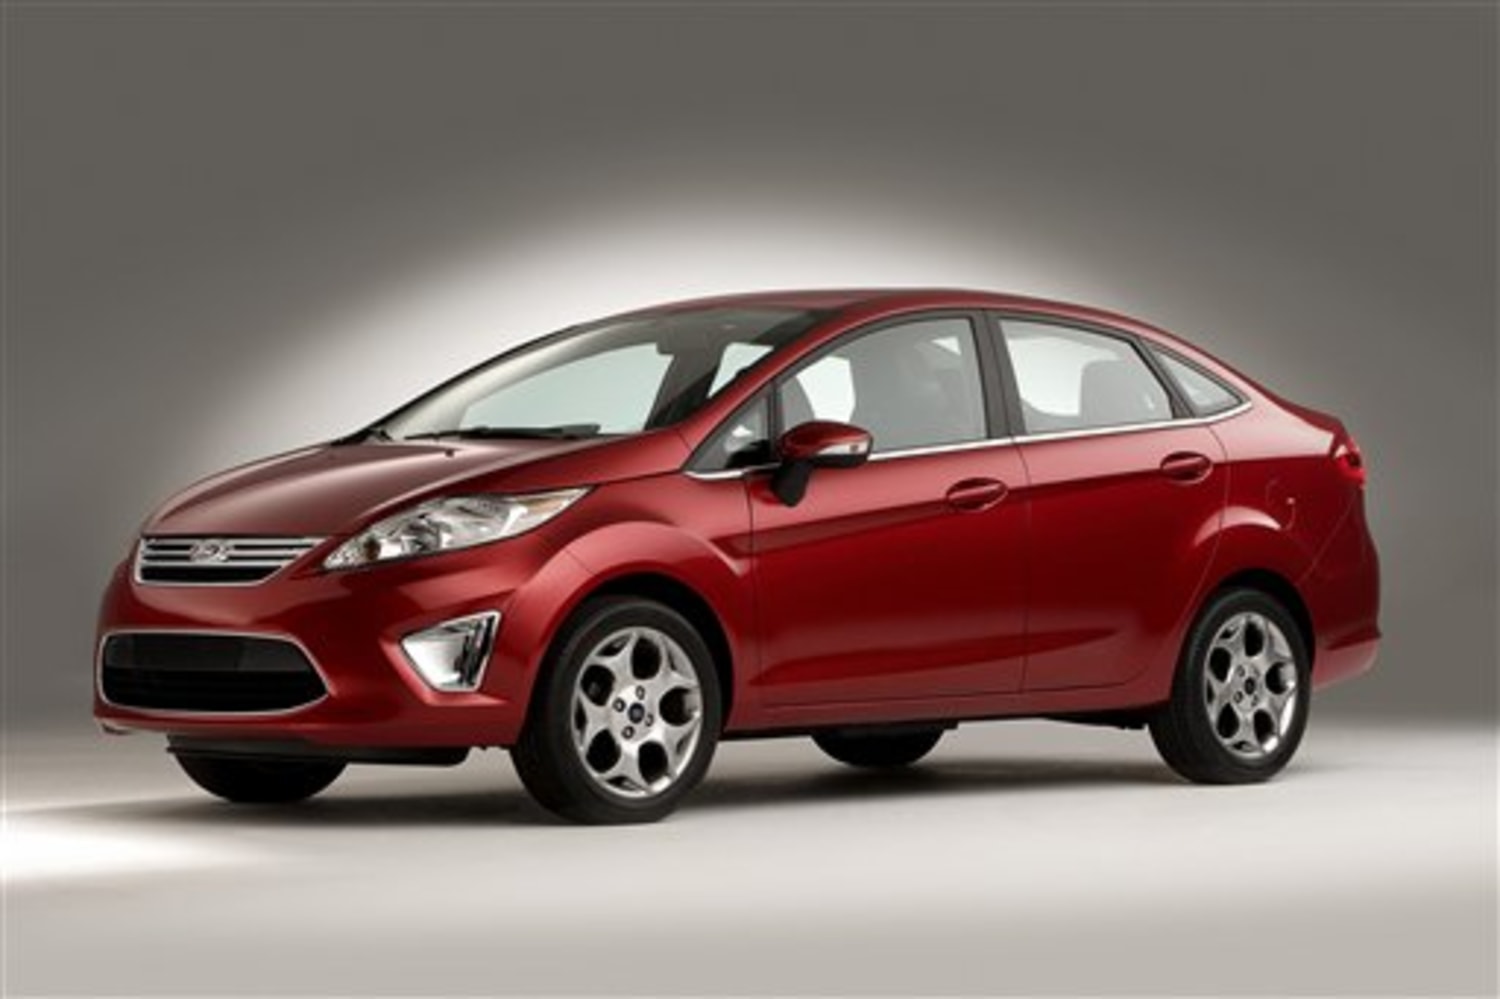 Ford gets small with Fiesta subcompact